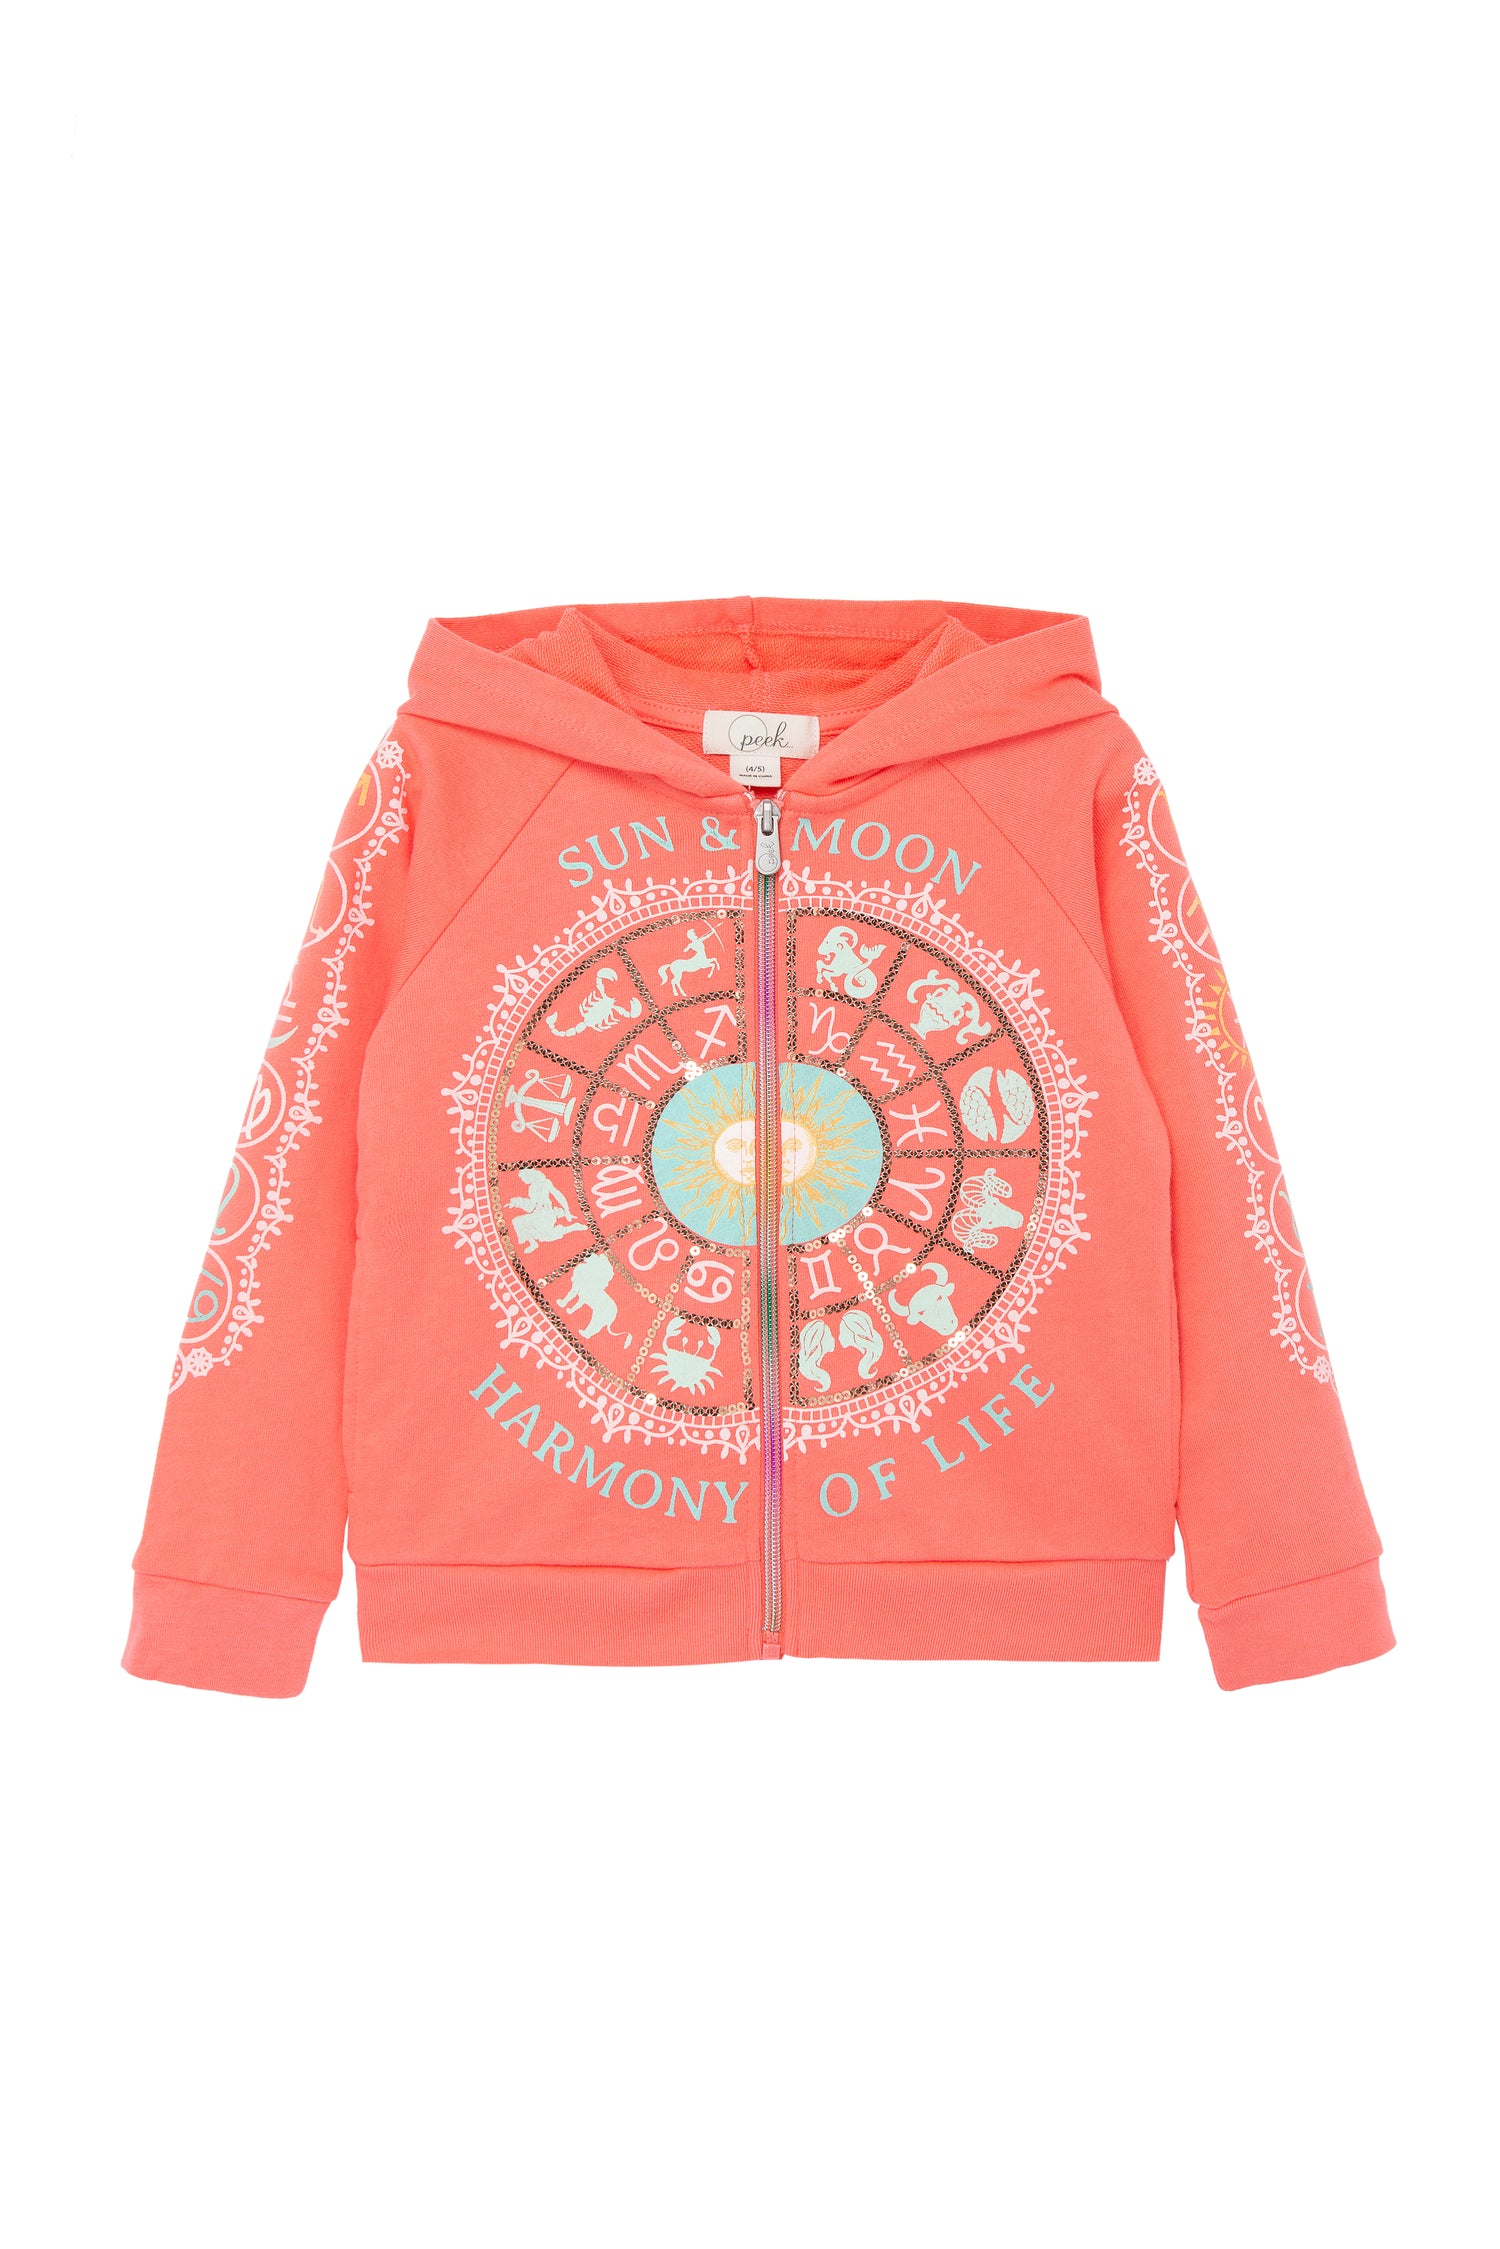 Coral hoodie with front zipper, astrology circle on front with text "sun & moon," "harmony of life," and zodiacs on sleeves